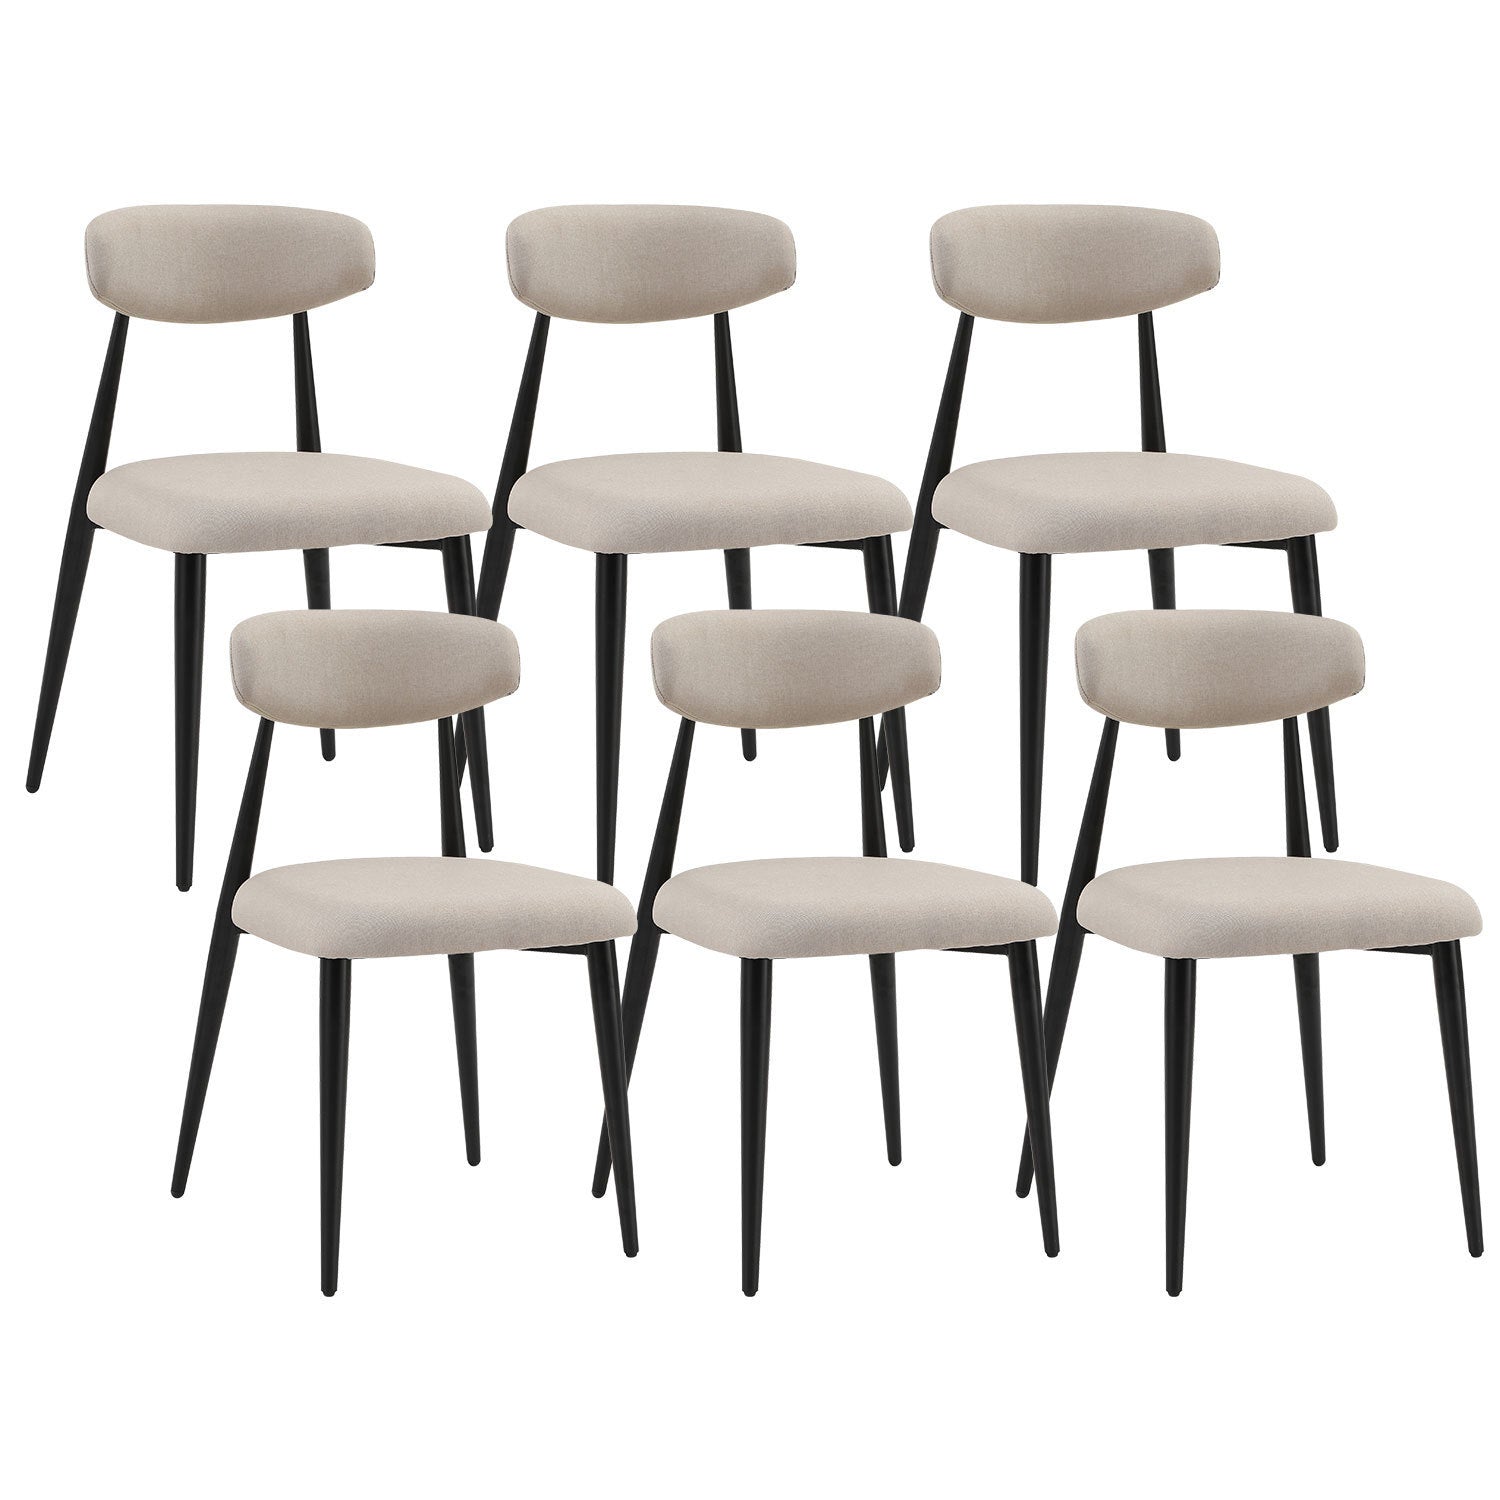 (Set of 6)Dining Chairs , Upholstered Chairs with Metal Legs for Kitchen Dining Room,Light Grey